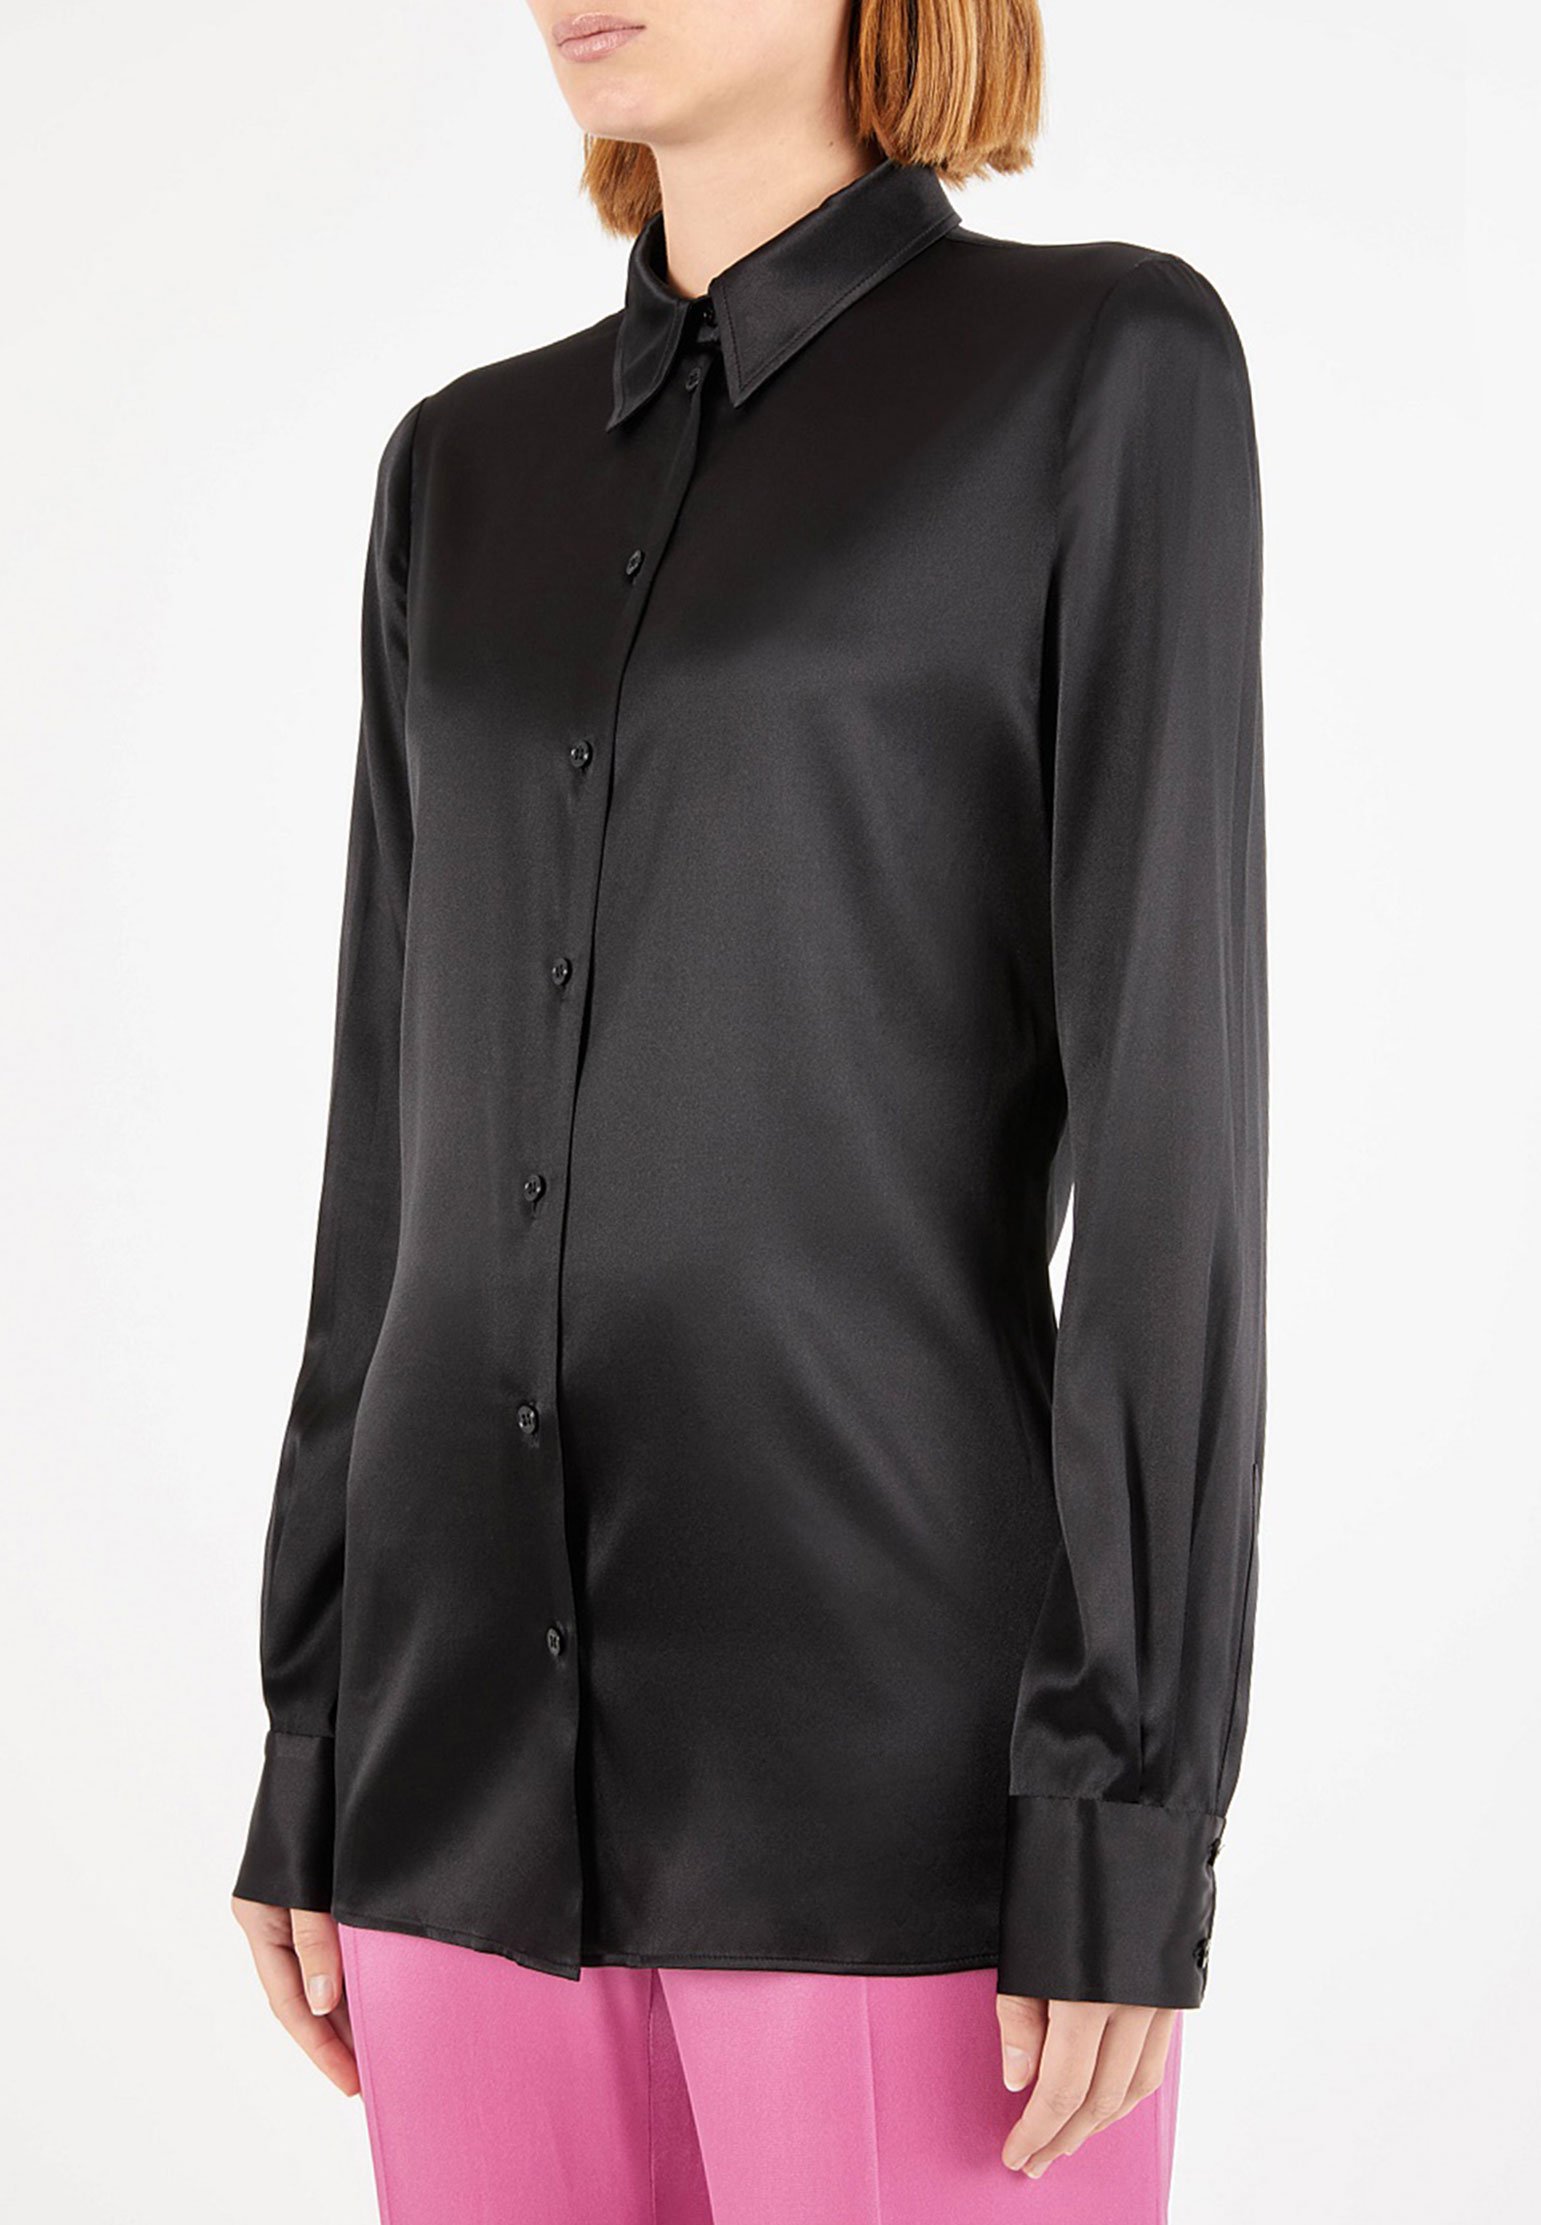 Shirt TOM FORD Color: black (Code: 1930) in online store Allure